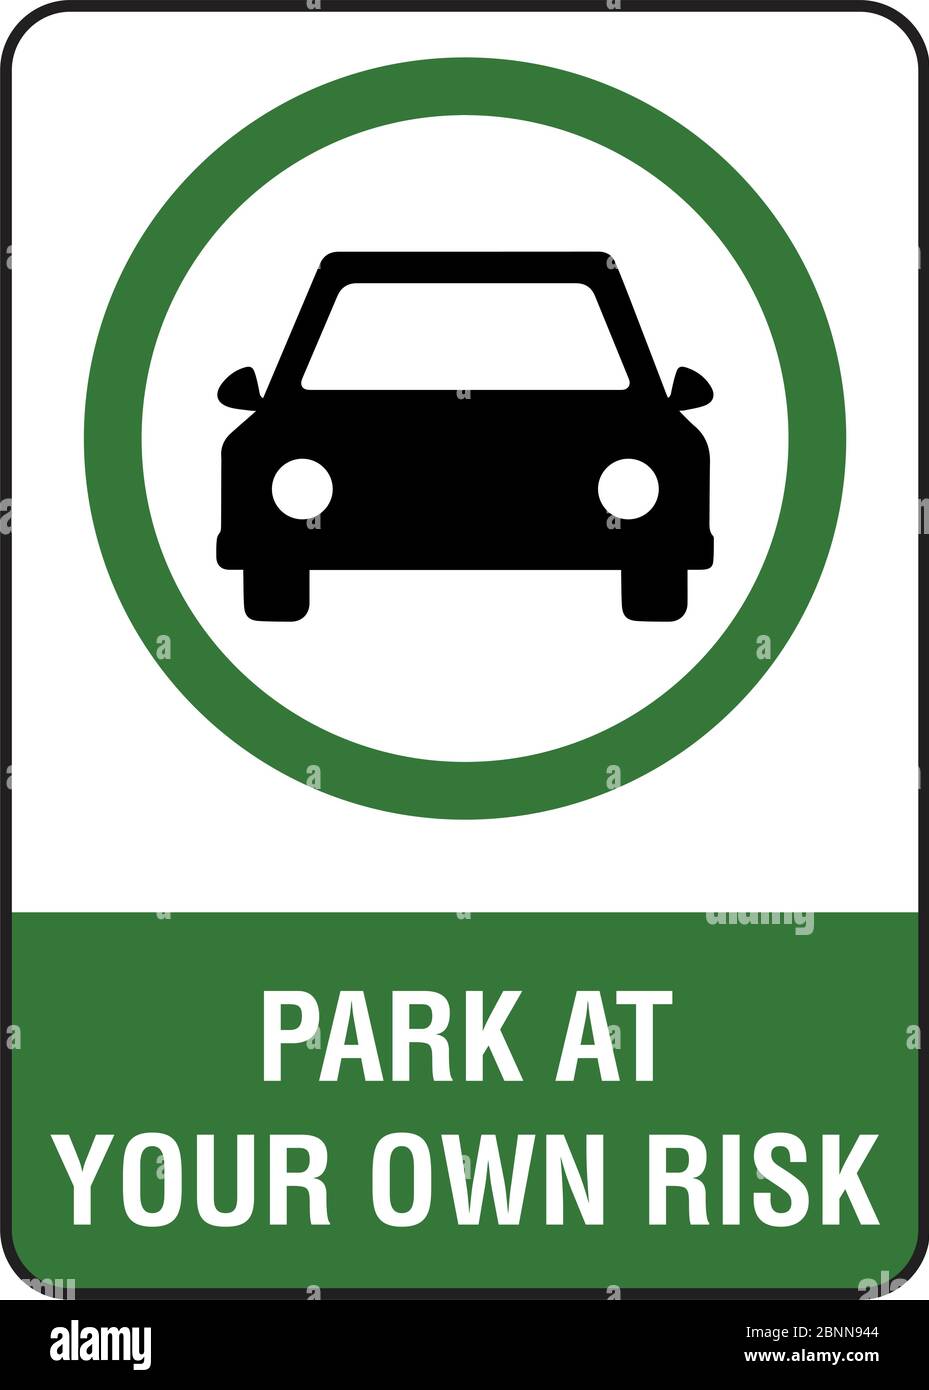 Park at your own risk car parking sign vector Stock Vector